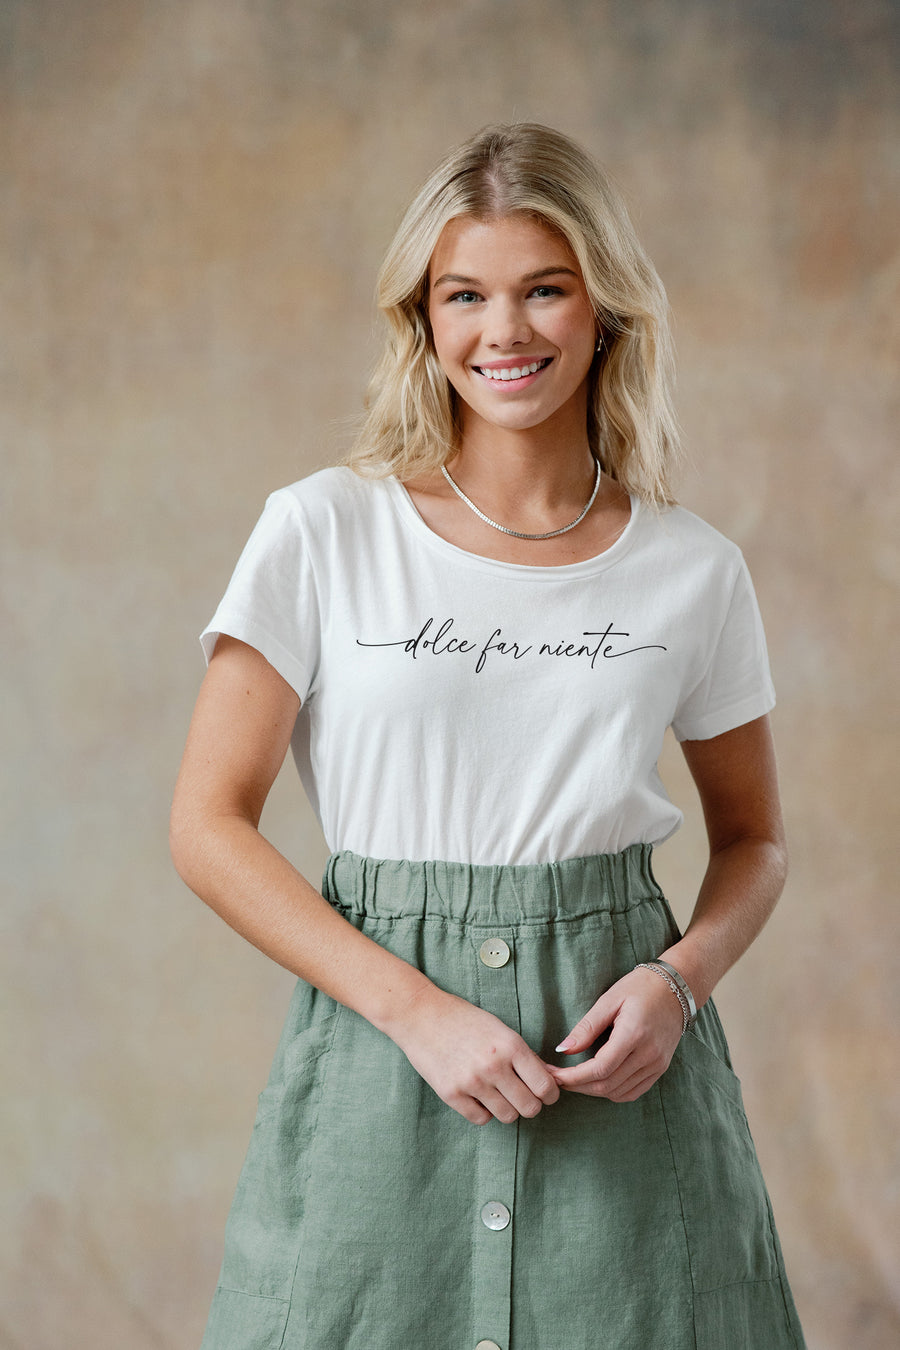 Dolce Far Niente Graphic Tee